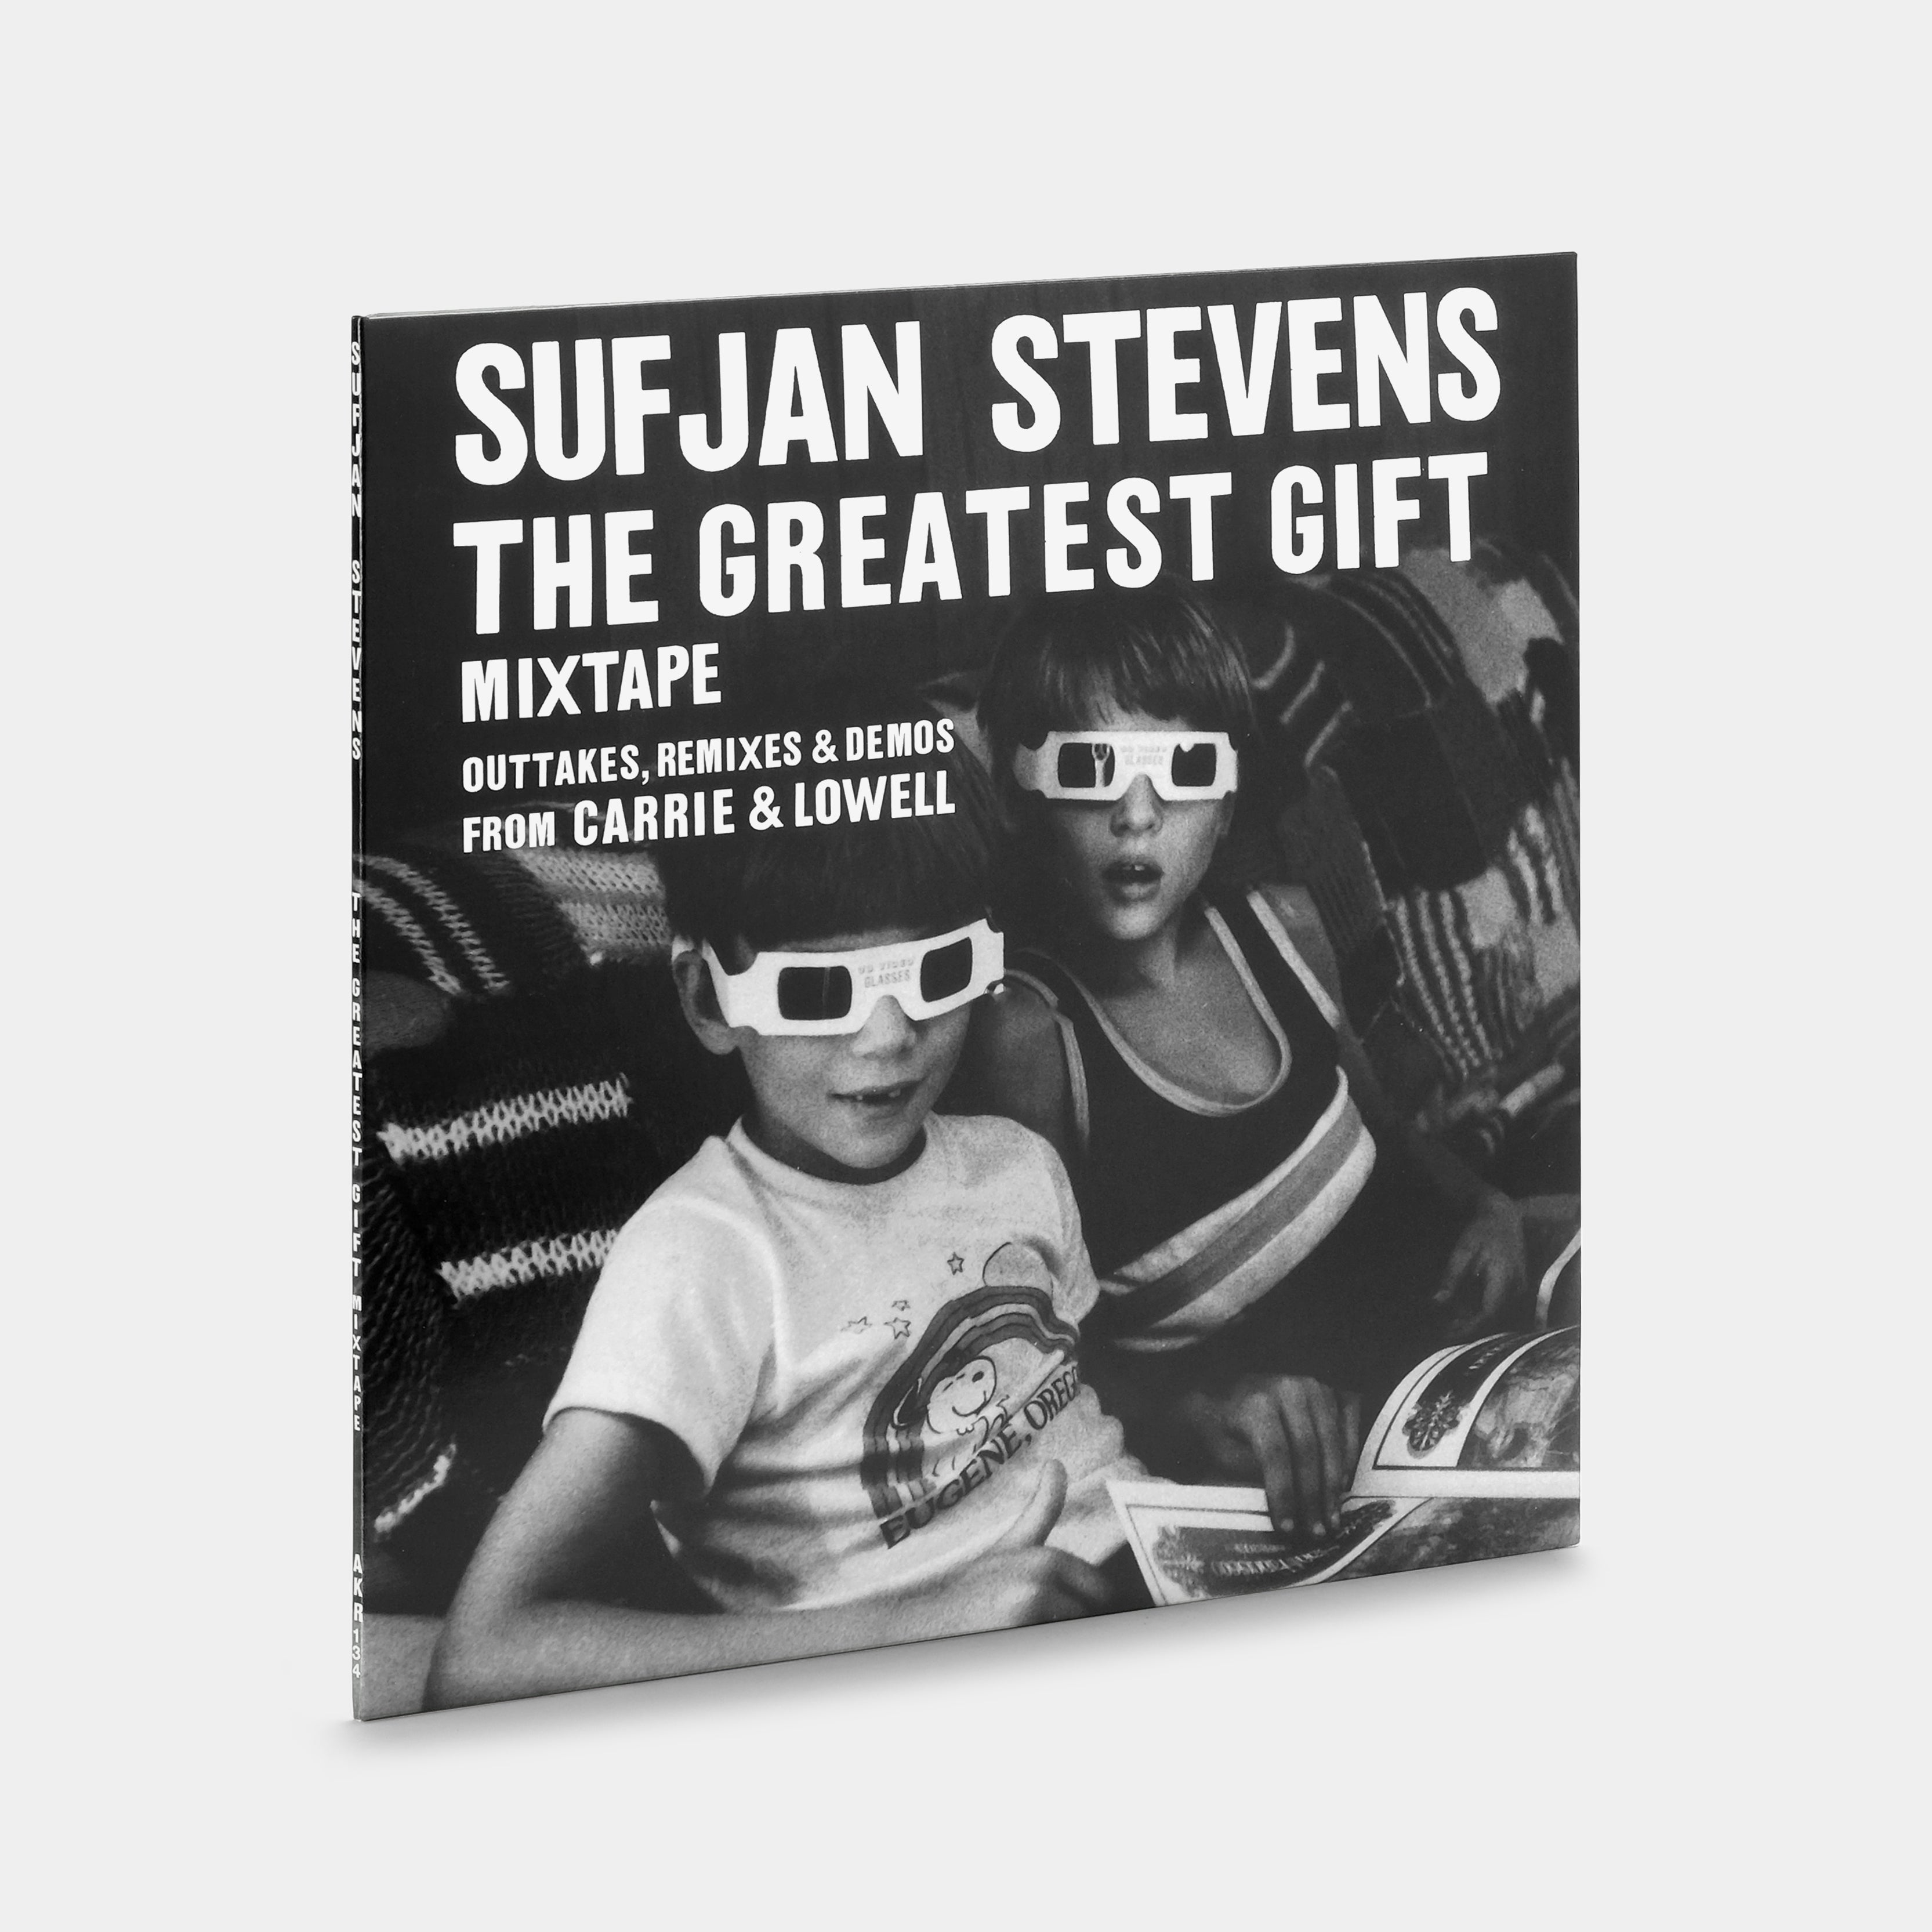 Sufjan Stevens - The Greatest Gift Mixtape (Outtakes, Remixes & Demos from Carrie & Lowell) LP Translucent Yellow Vinyl Record